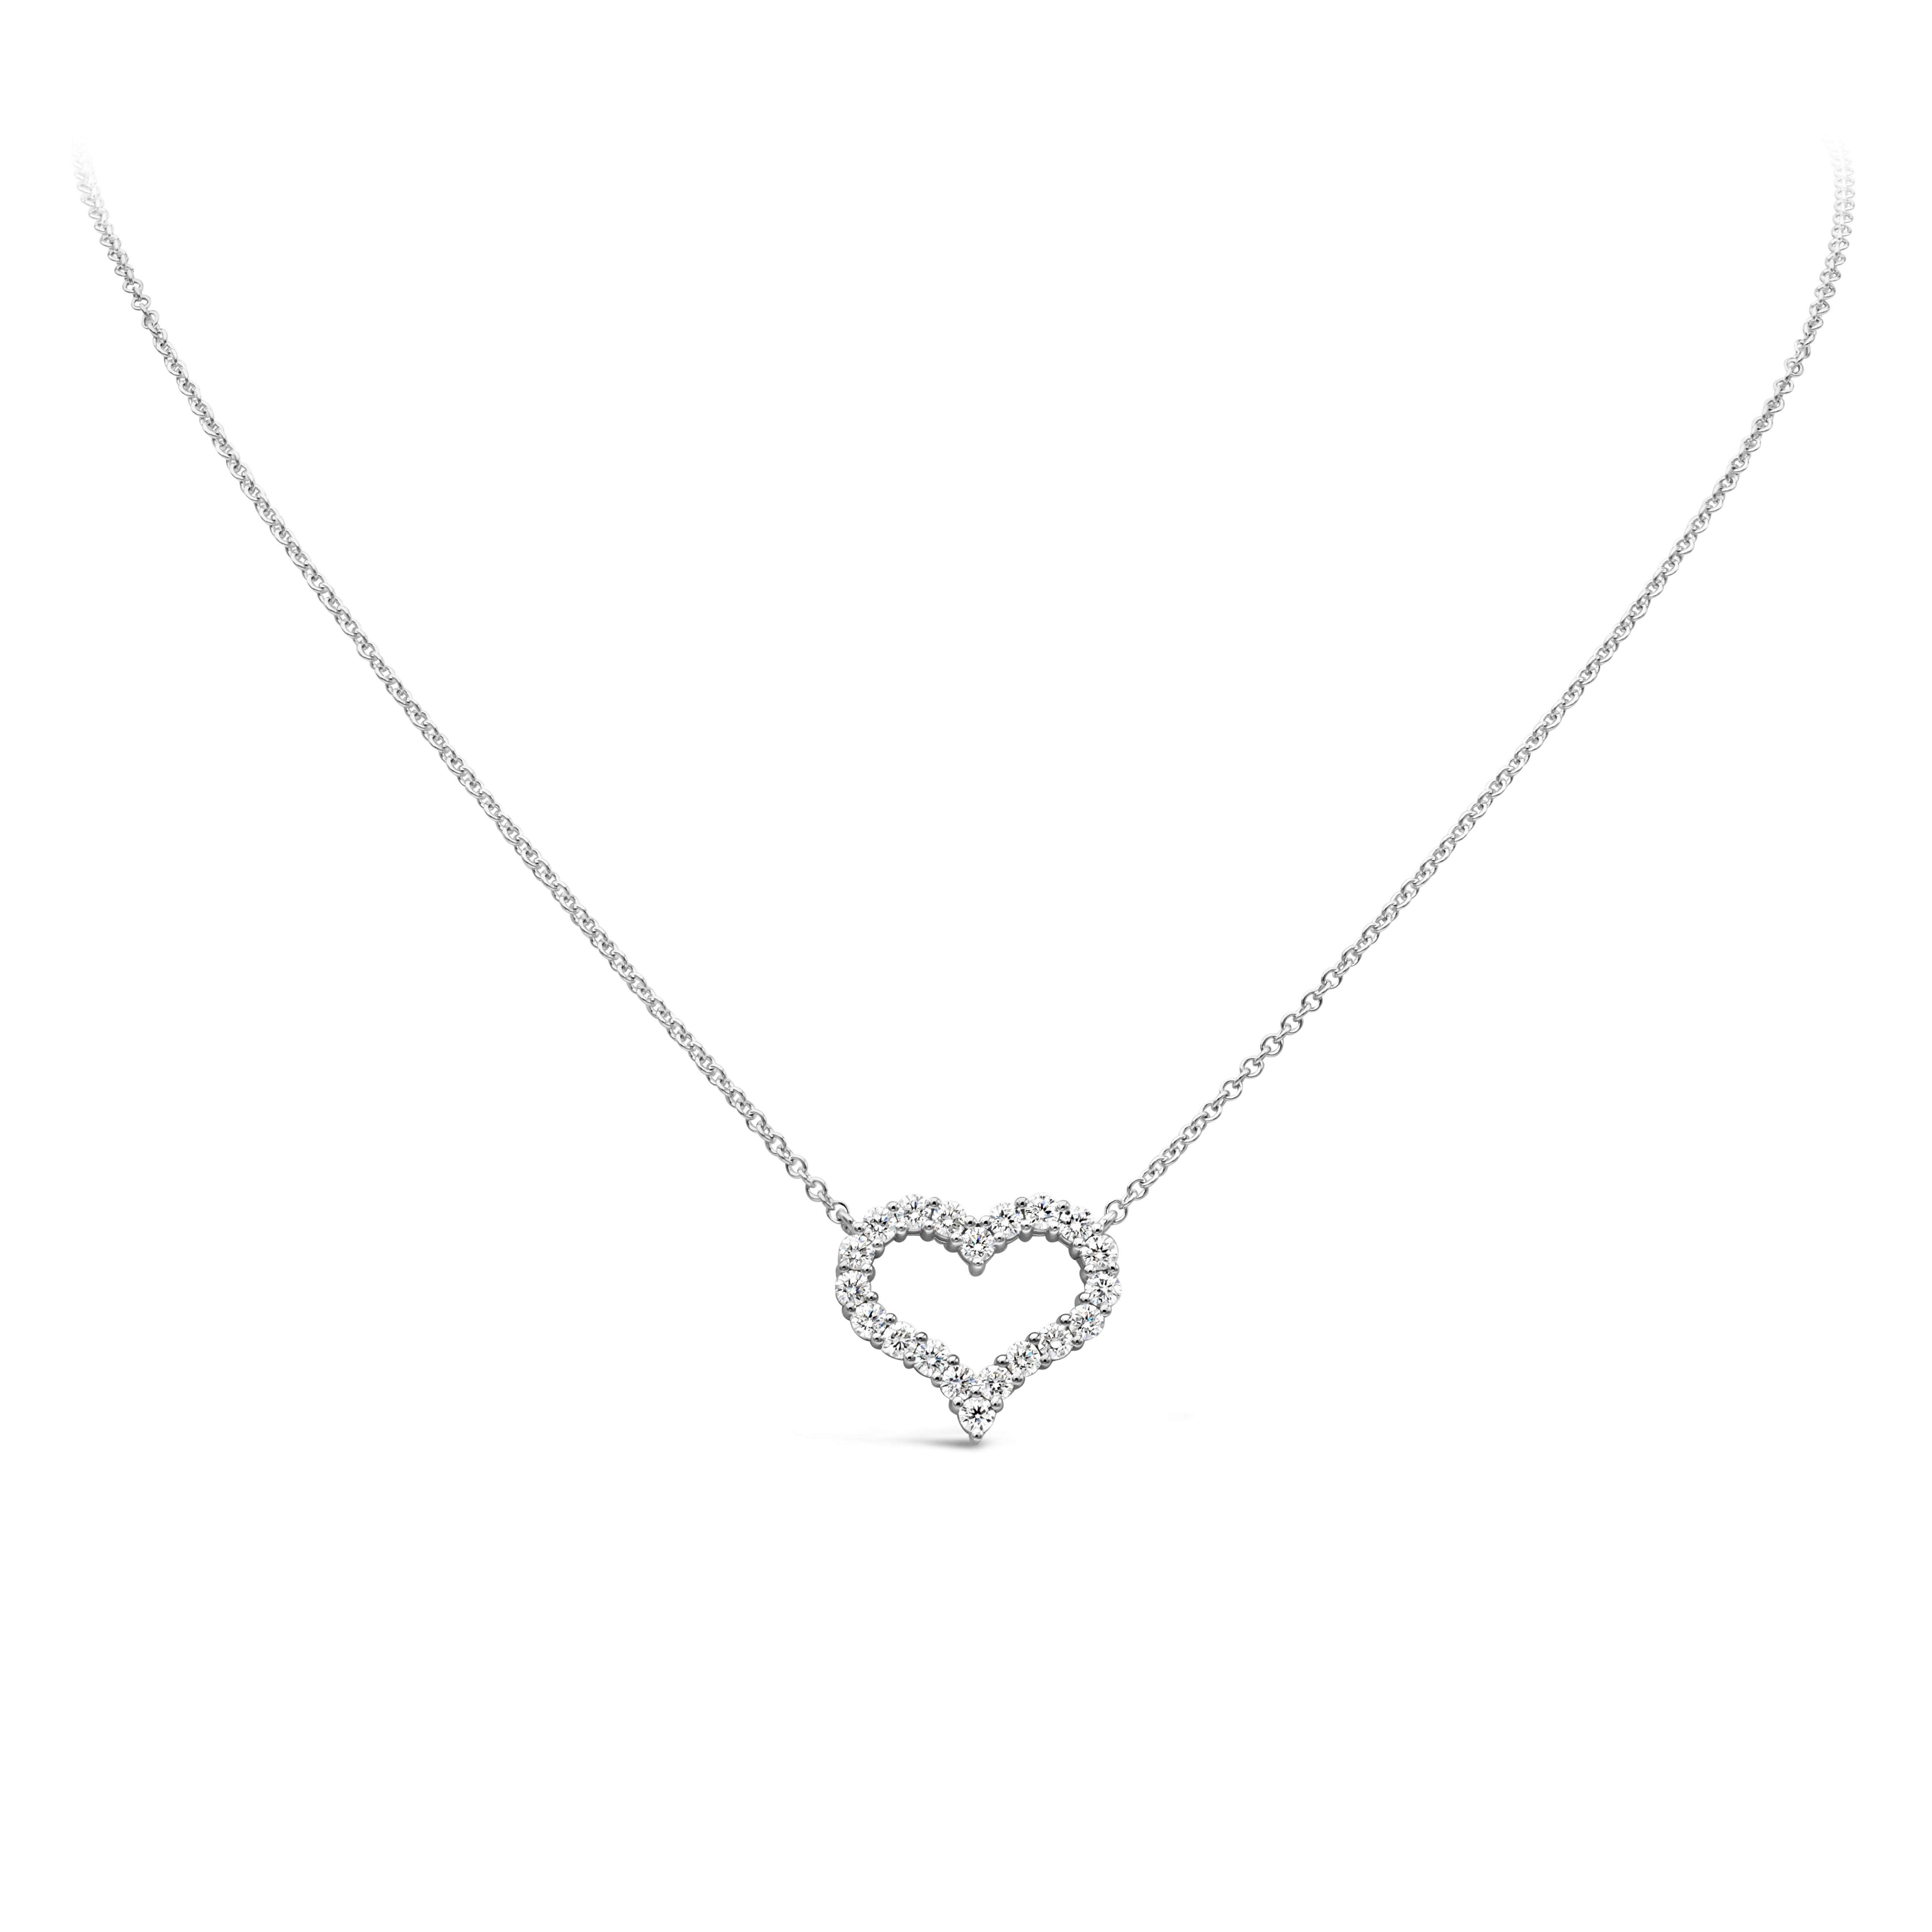 A simple and unique pendant necklace showcasing a row of round brilliant diamonds weighing 1.12 carats total, F color and VS/SI1 in clarity. Set in an open-work heart shape mounting made in 18K white gold and shared prong setting. Suspended on an 18